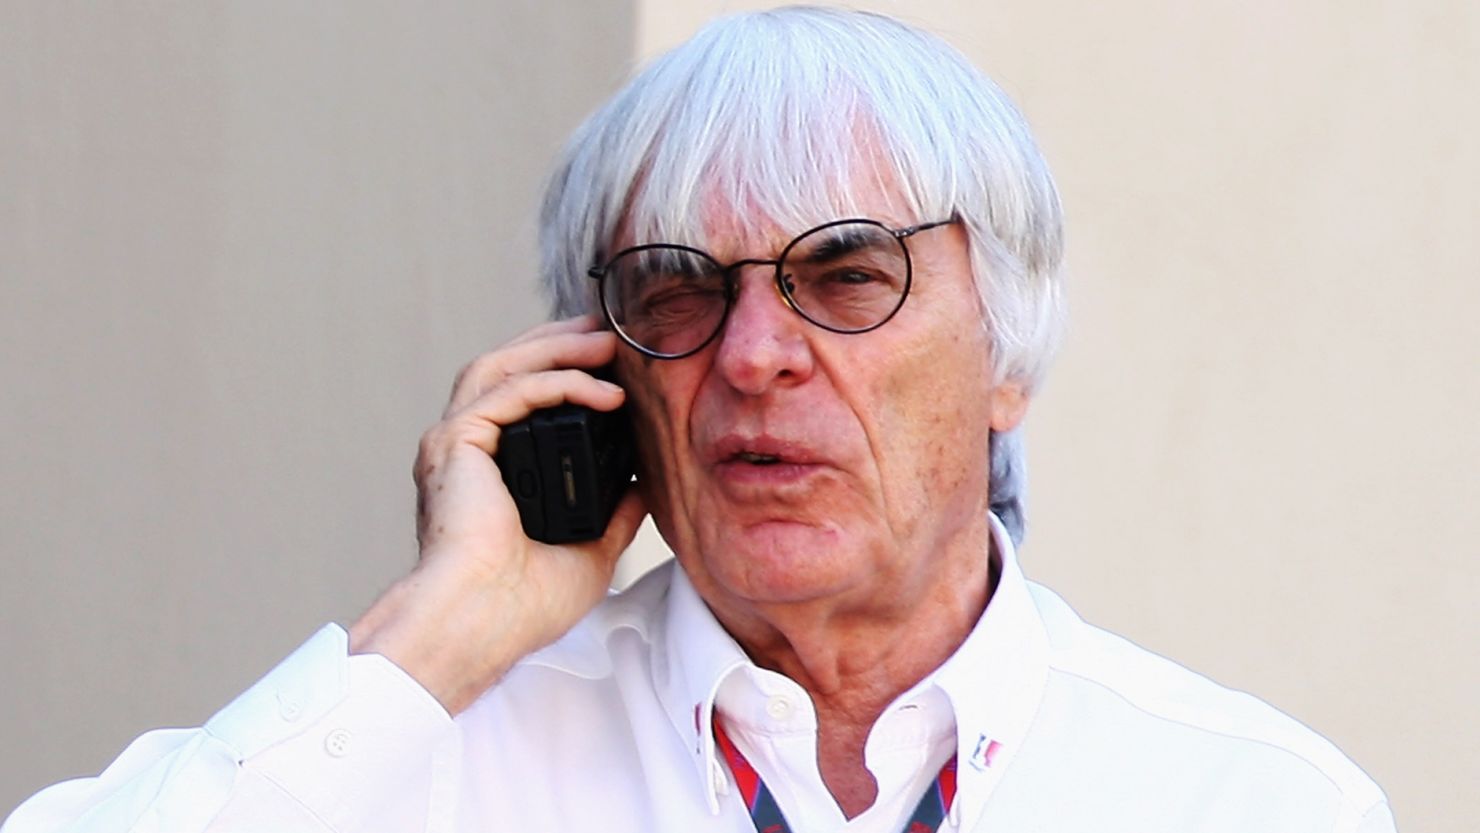 Bernie Ecclestone supports the idea of introducing team budgets to Formula One.